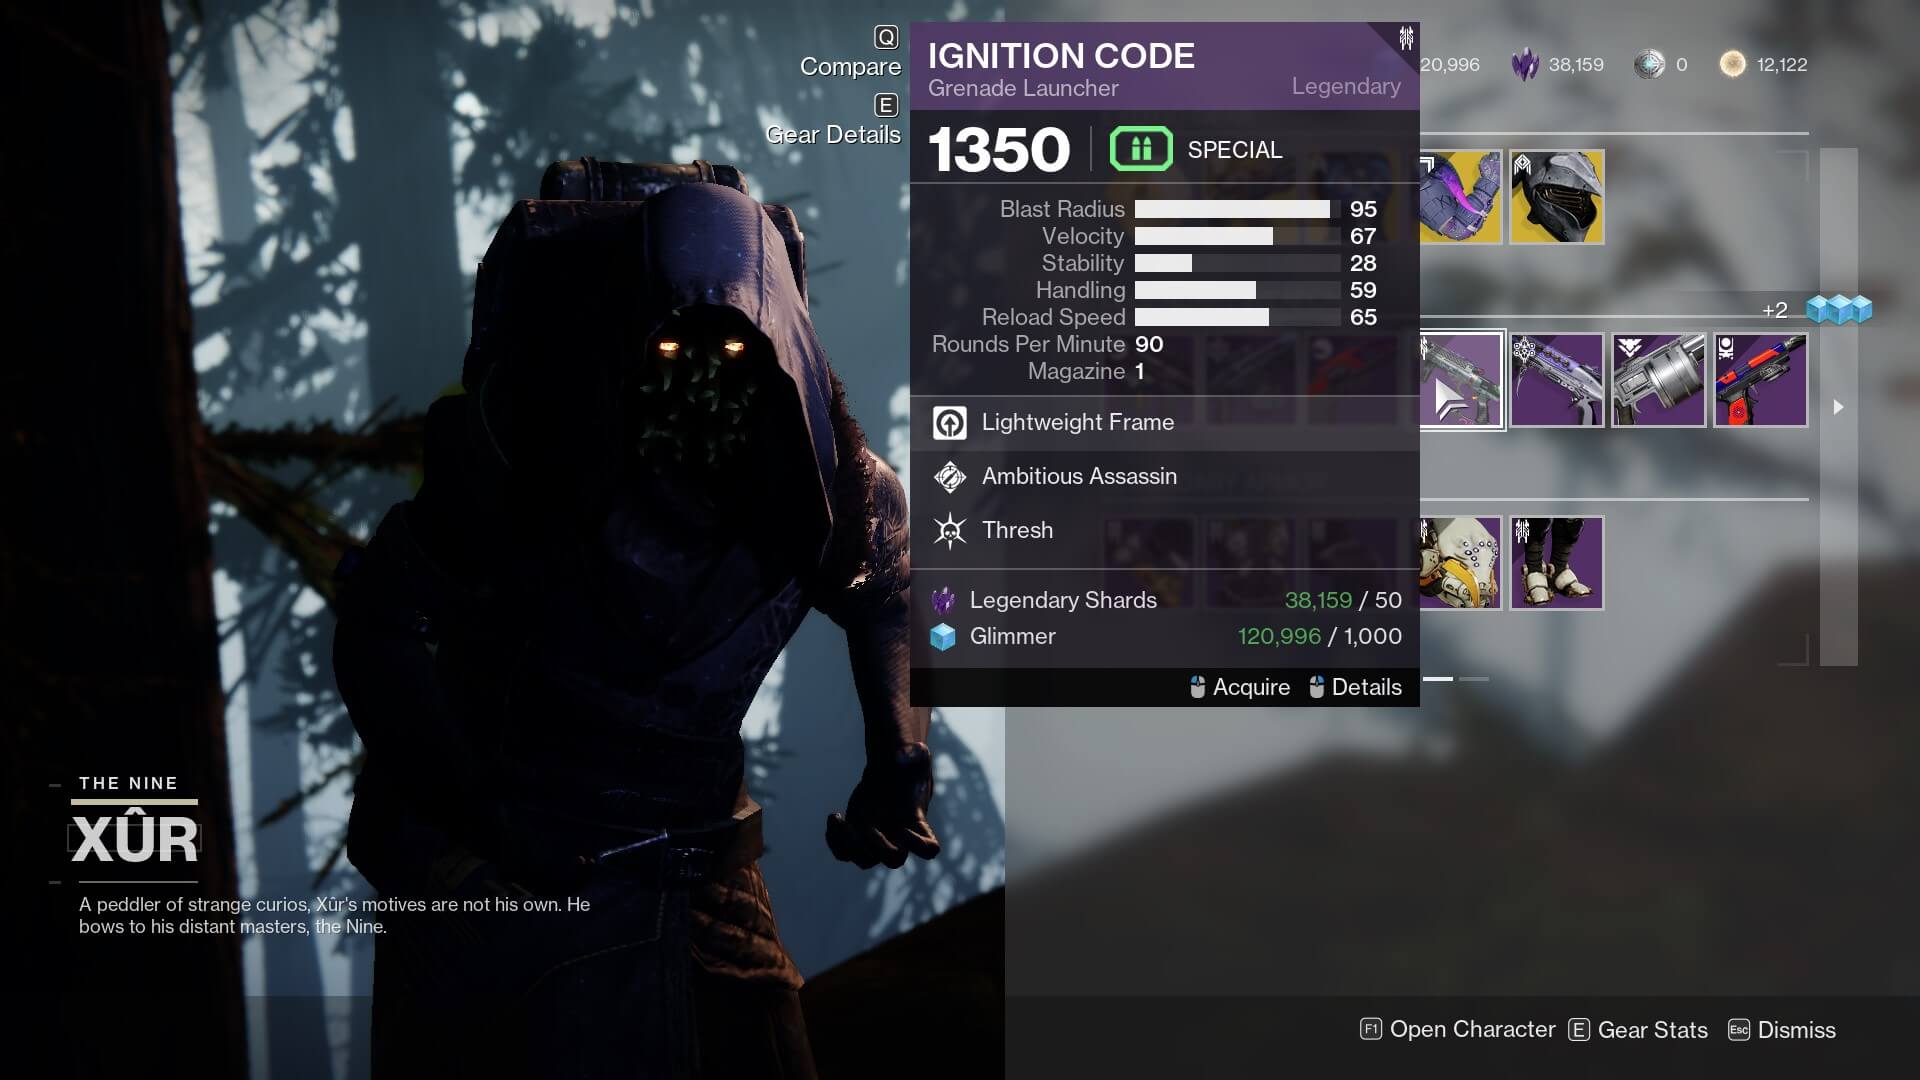 Where Is Xur Today In Destiny 2? Location And Exotic Inventory - February 3, 2023